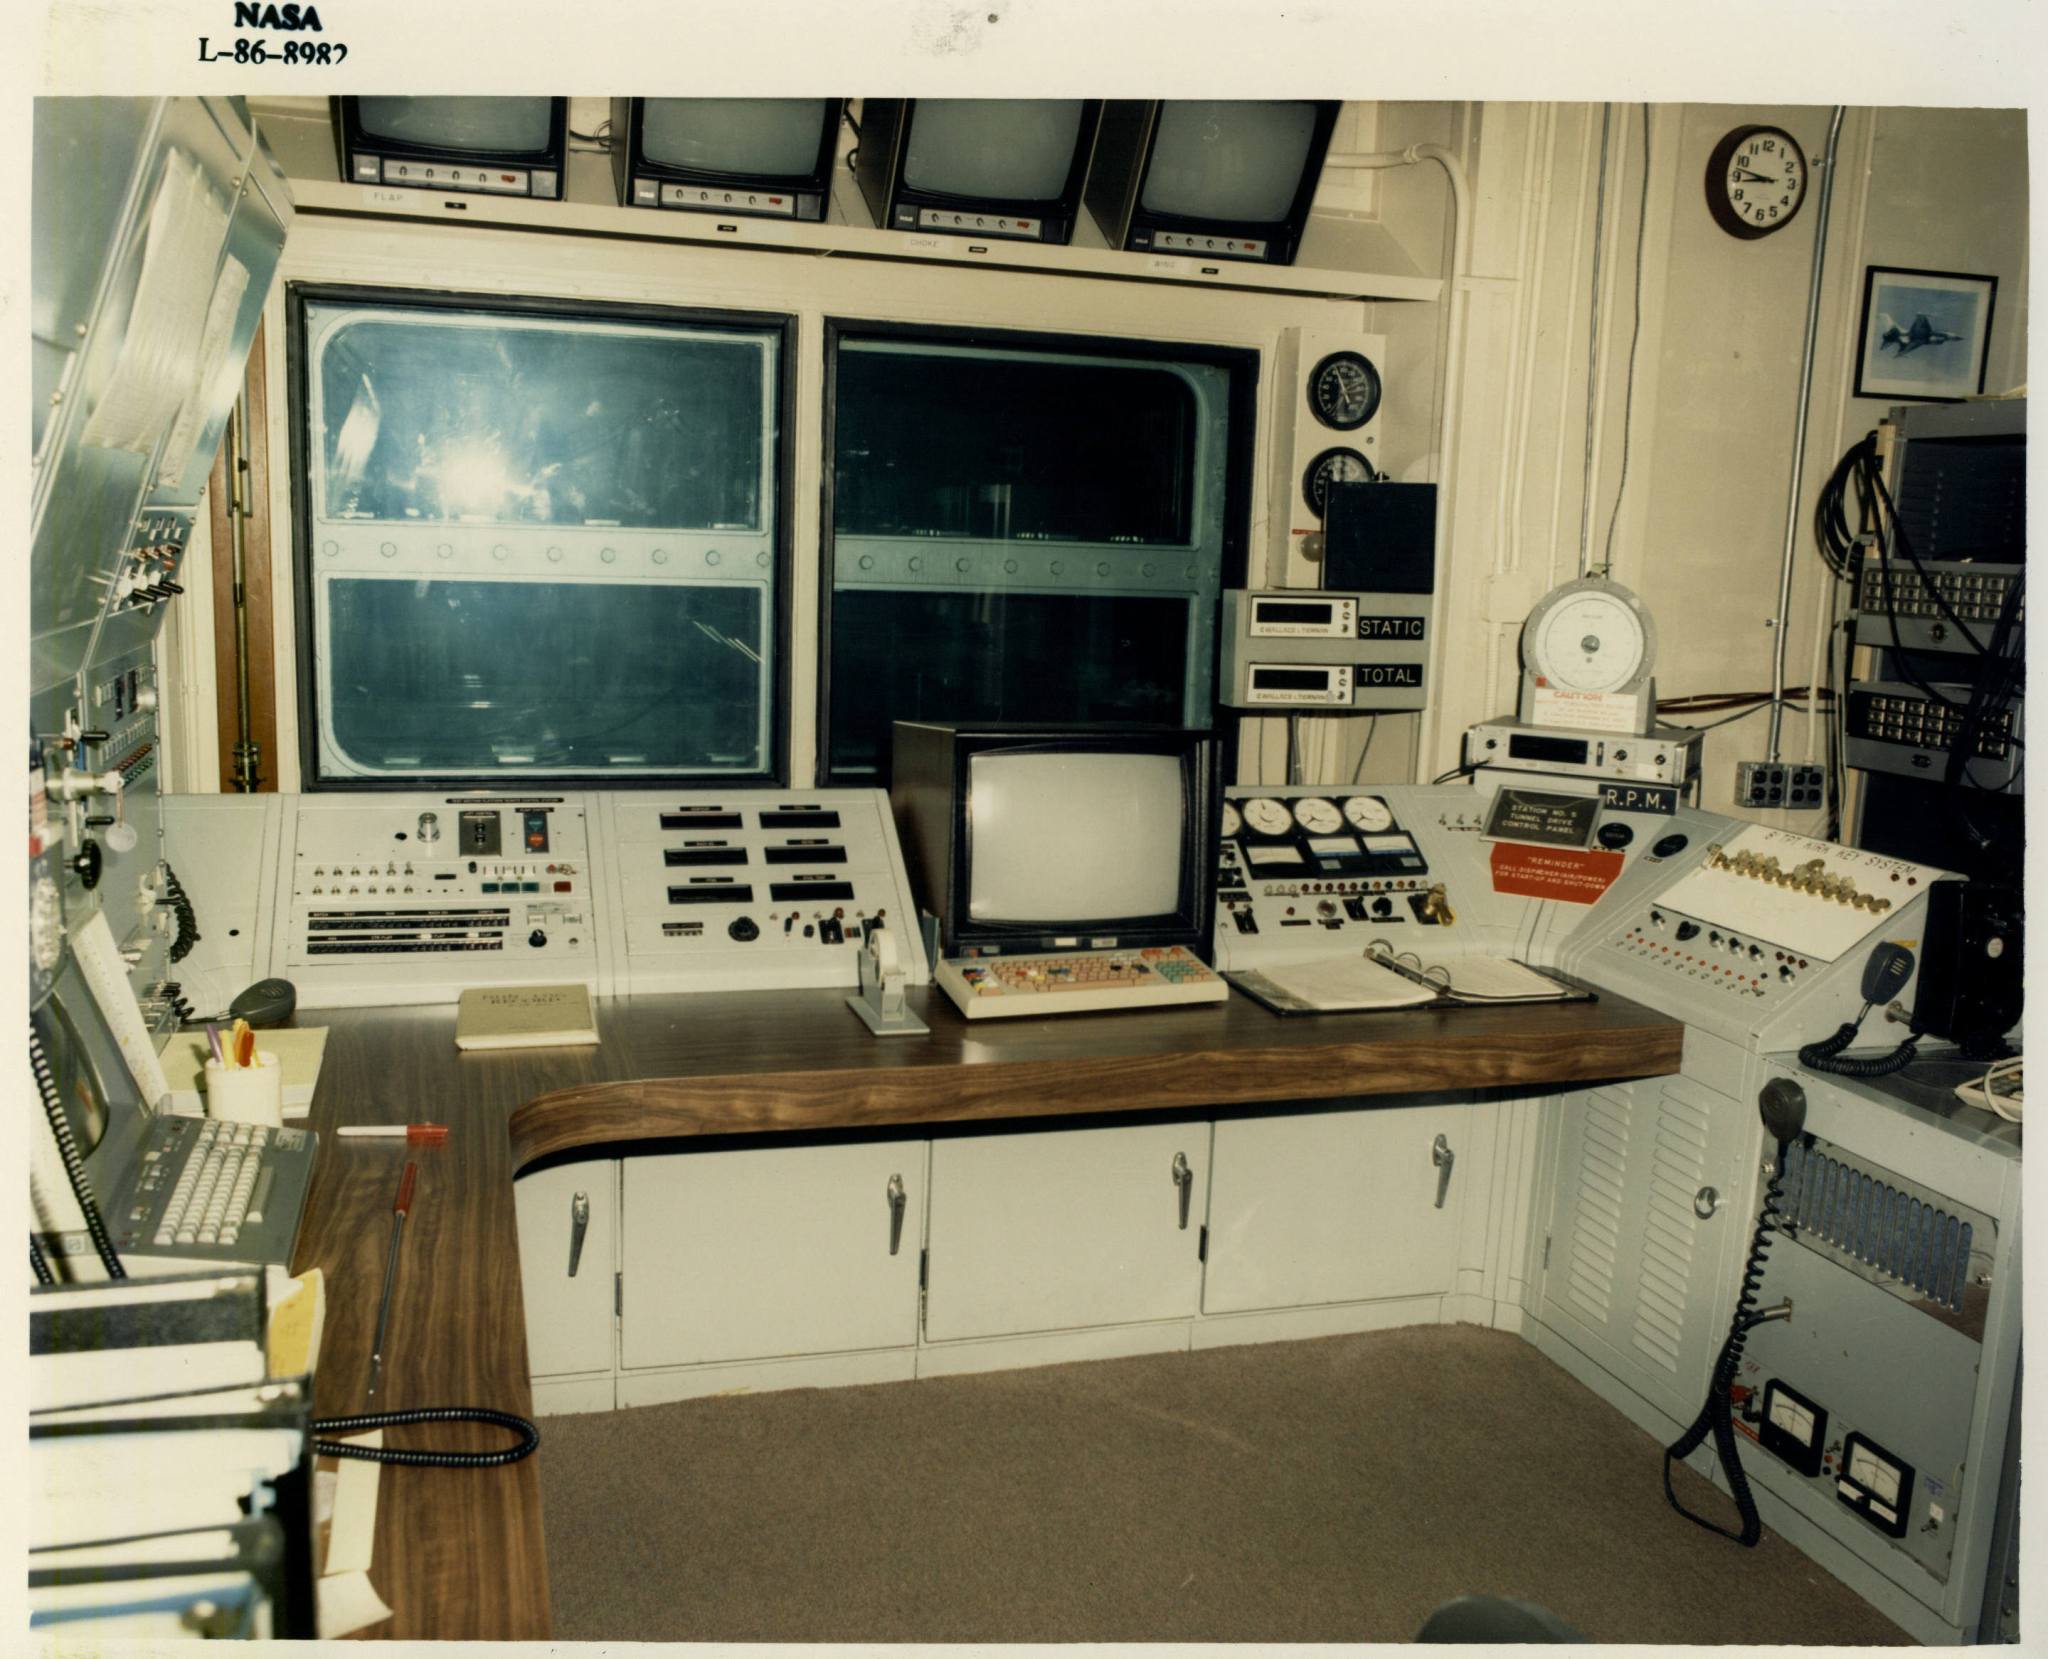 The 8-Foot High-Speed Tunnel’s control room configuration in 1986.